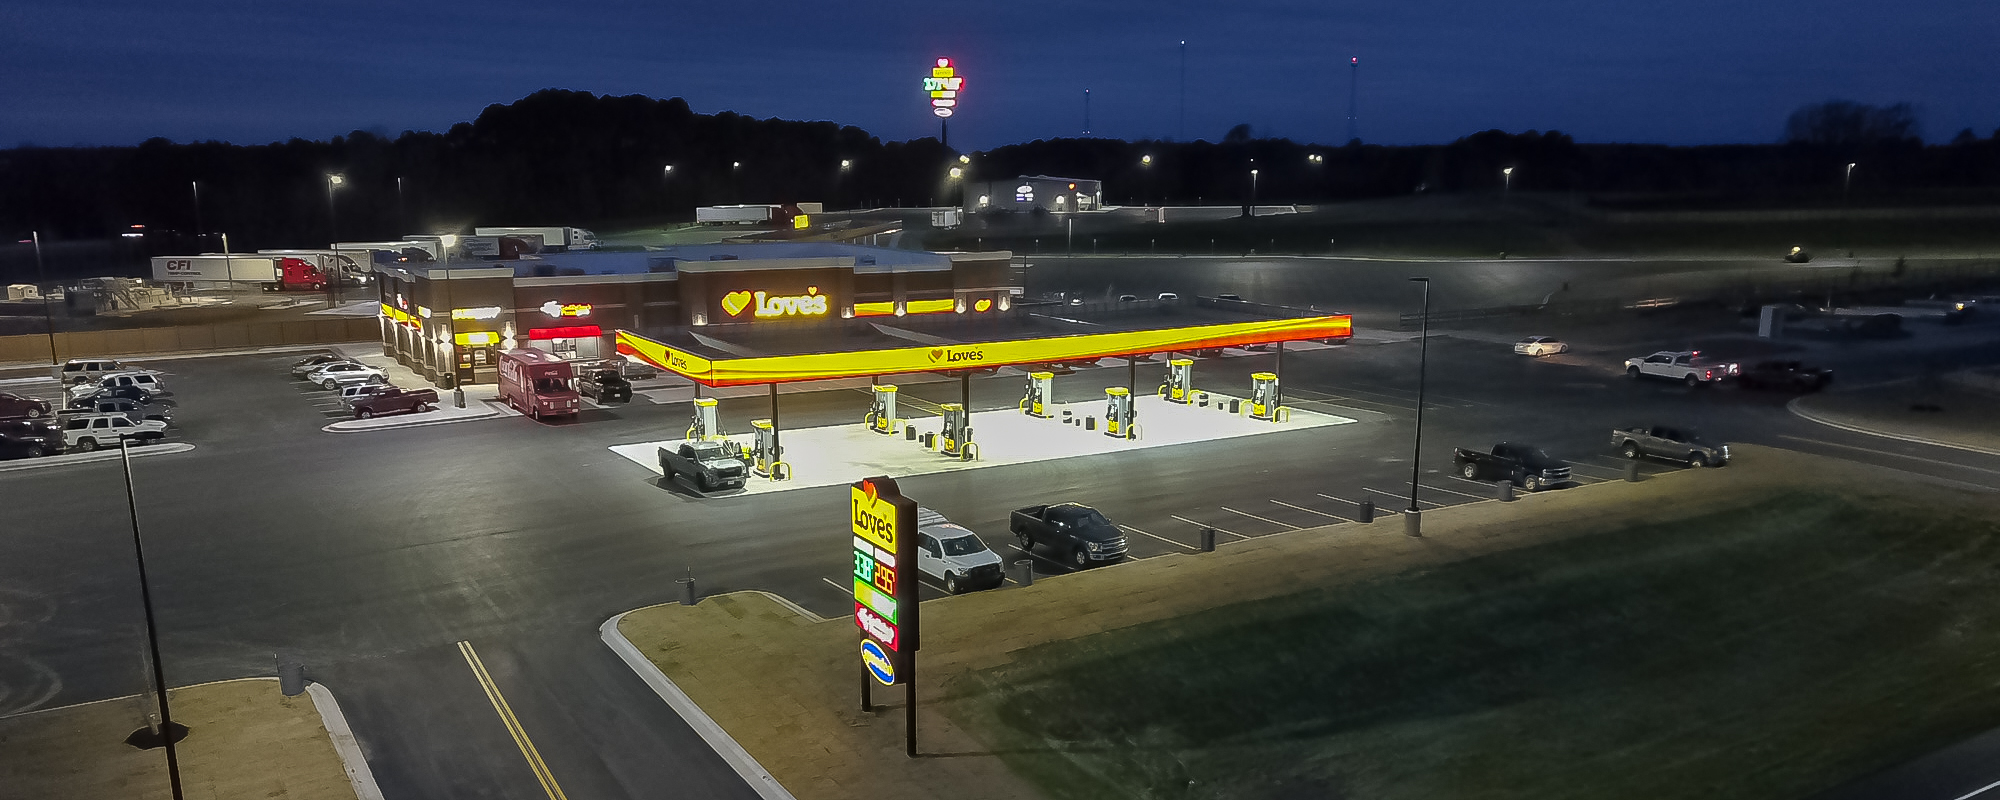 loves travel stop with gas pumps at night time in Winona Texas